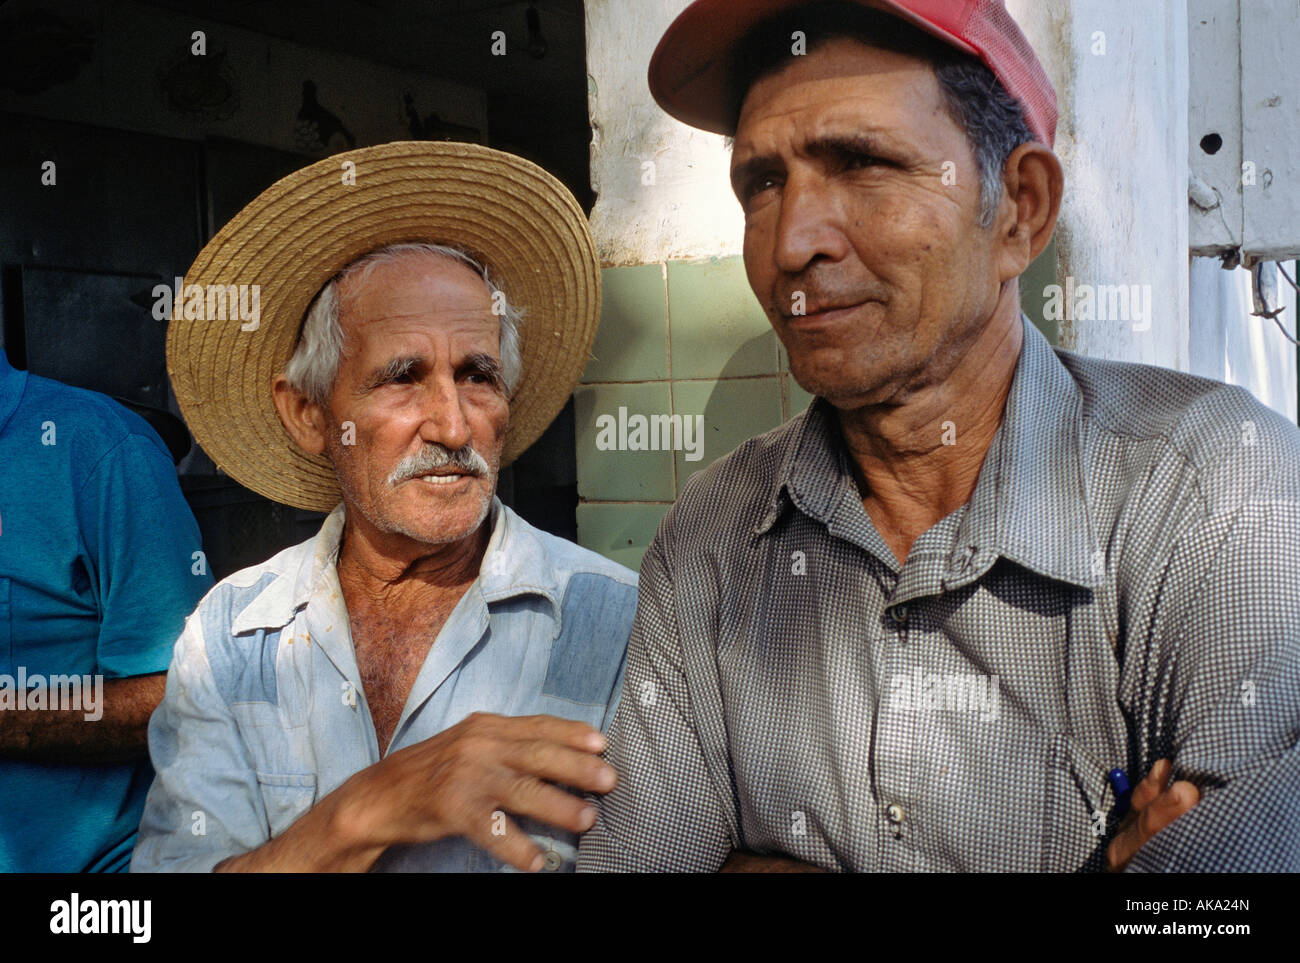 Two men in front of a market in Habana Libre a sugar production town or batey in the Province of La Habana Cuba Stock Photo